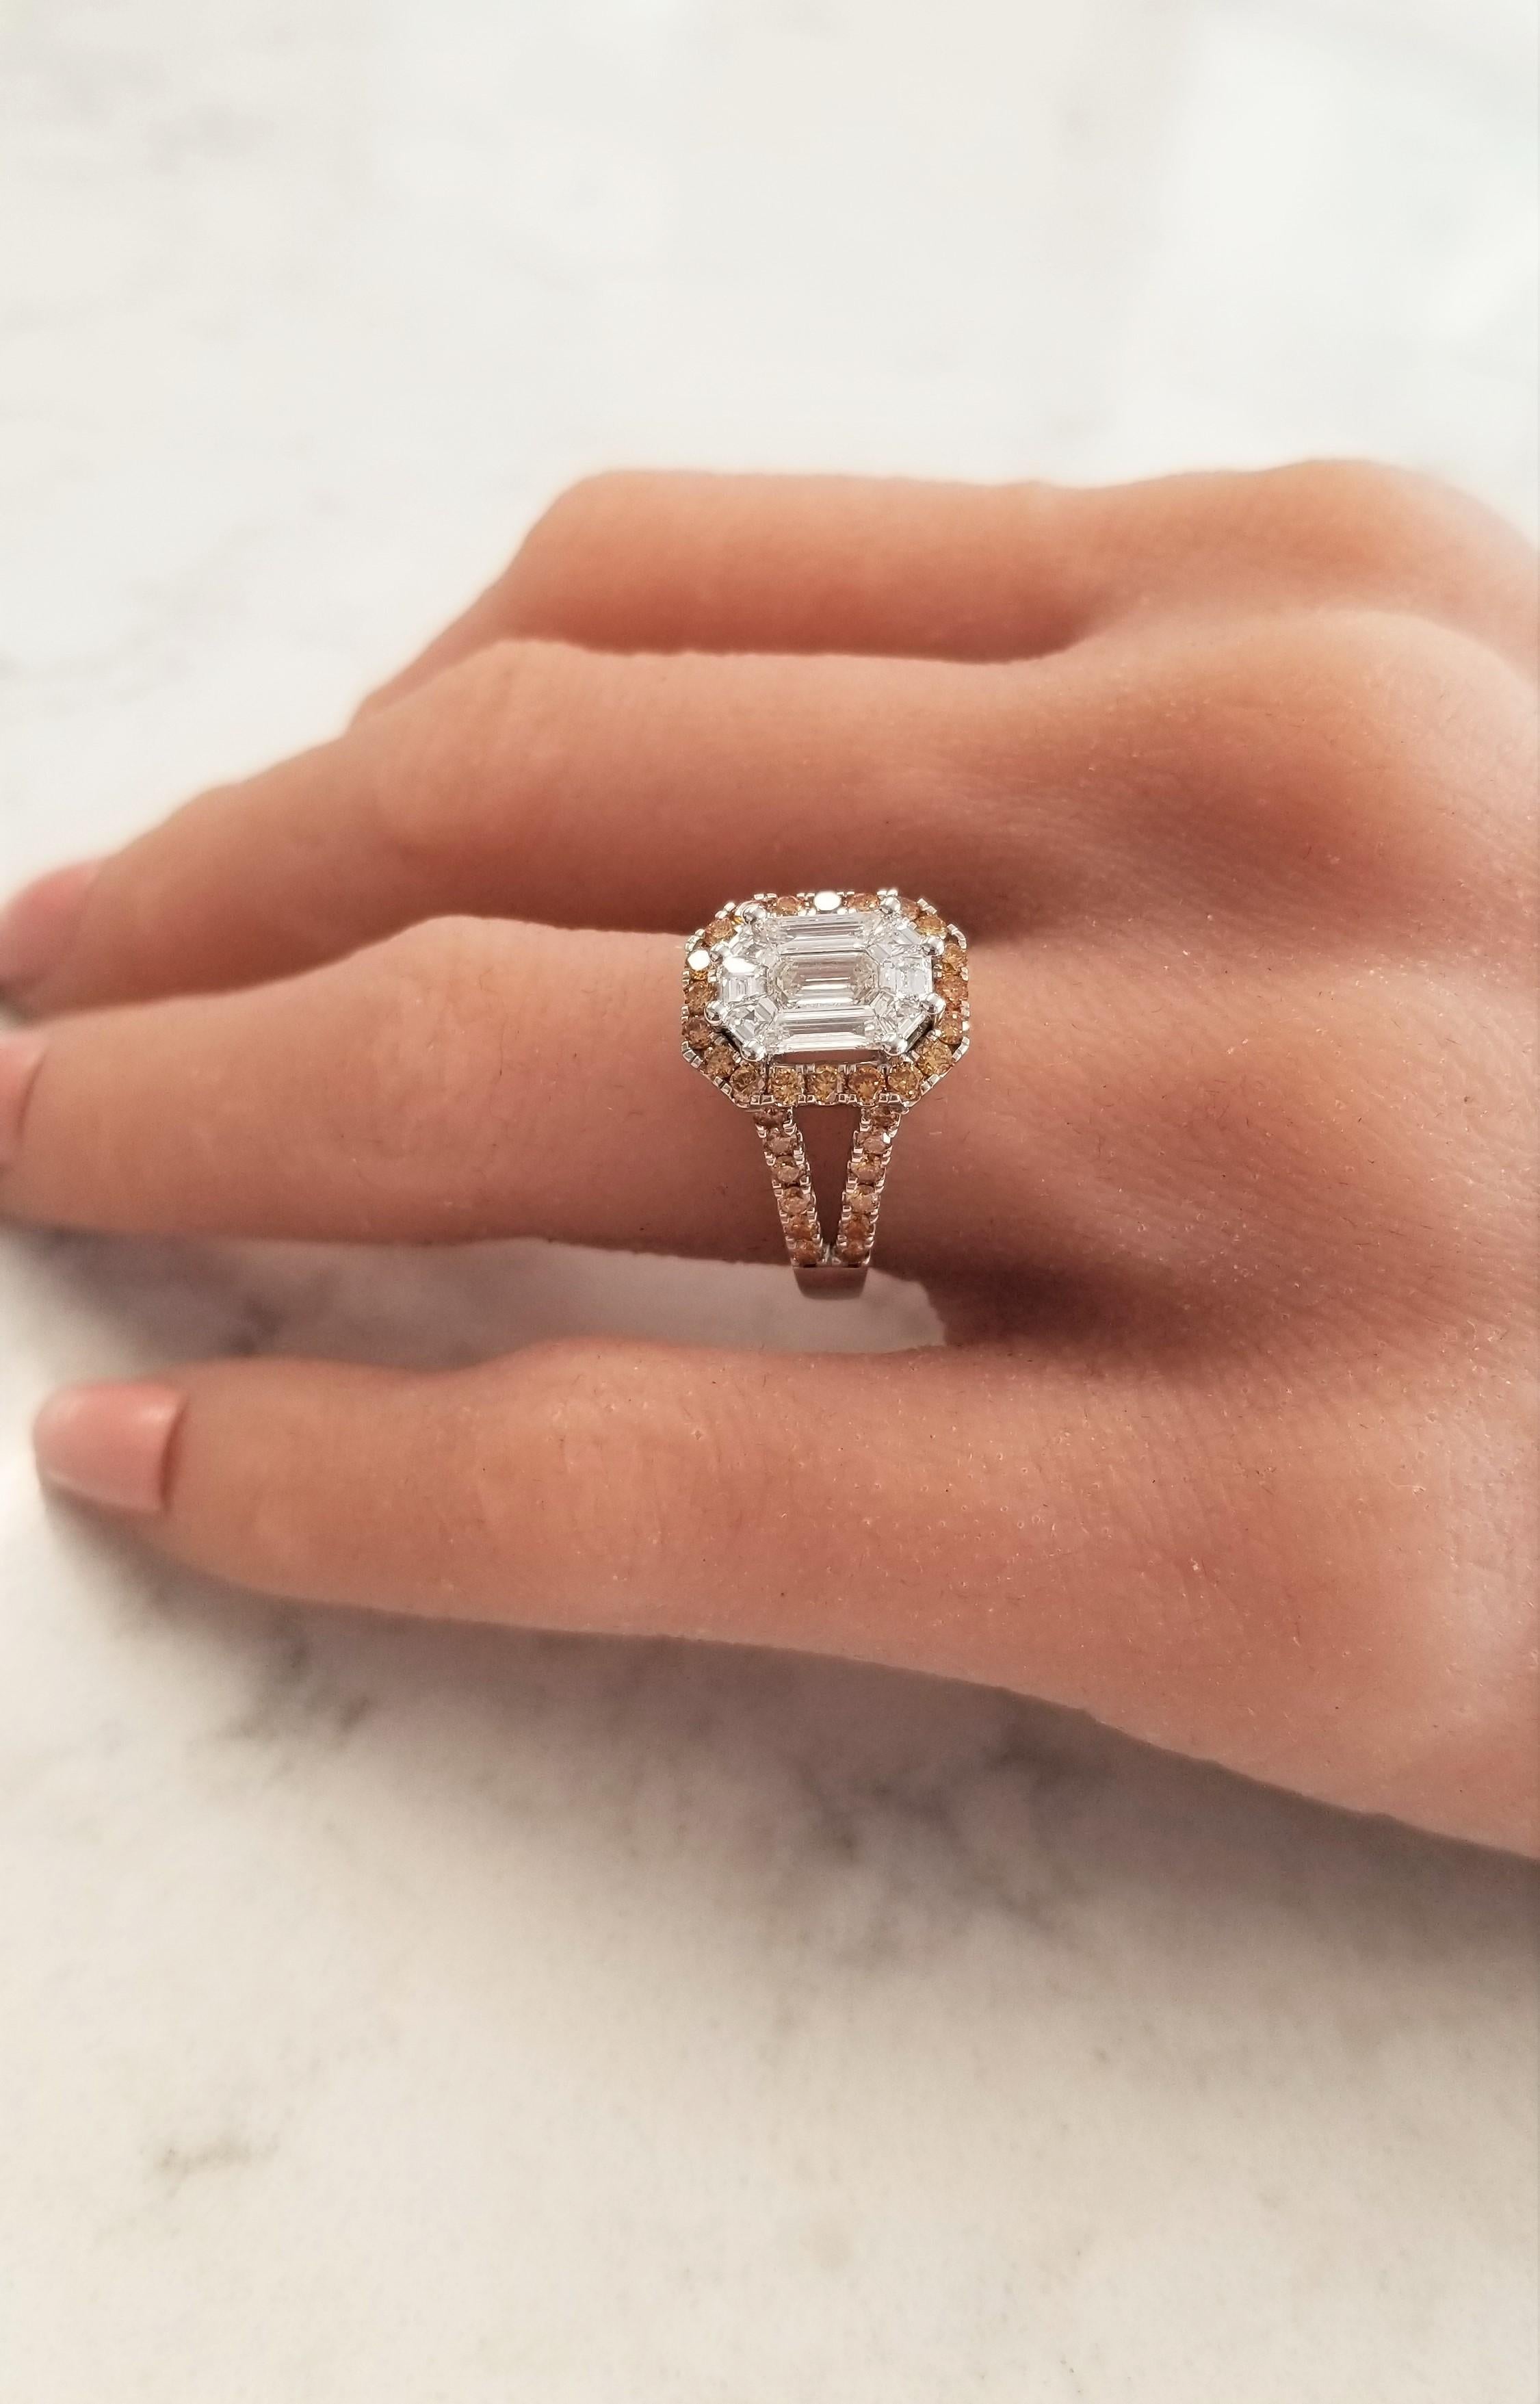 This is an illusion set ring. An emerald cut diamond is double prong set in the center, 9 step-cut trapezoid diamonds surround the emerald cut totaling for 2.11 carats. Together, the white diamonds measure 10.14x7.44mm. 1.10 carats of round